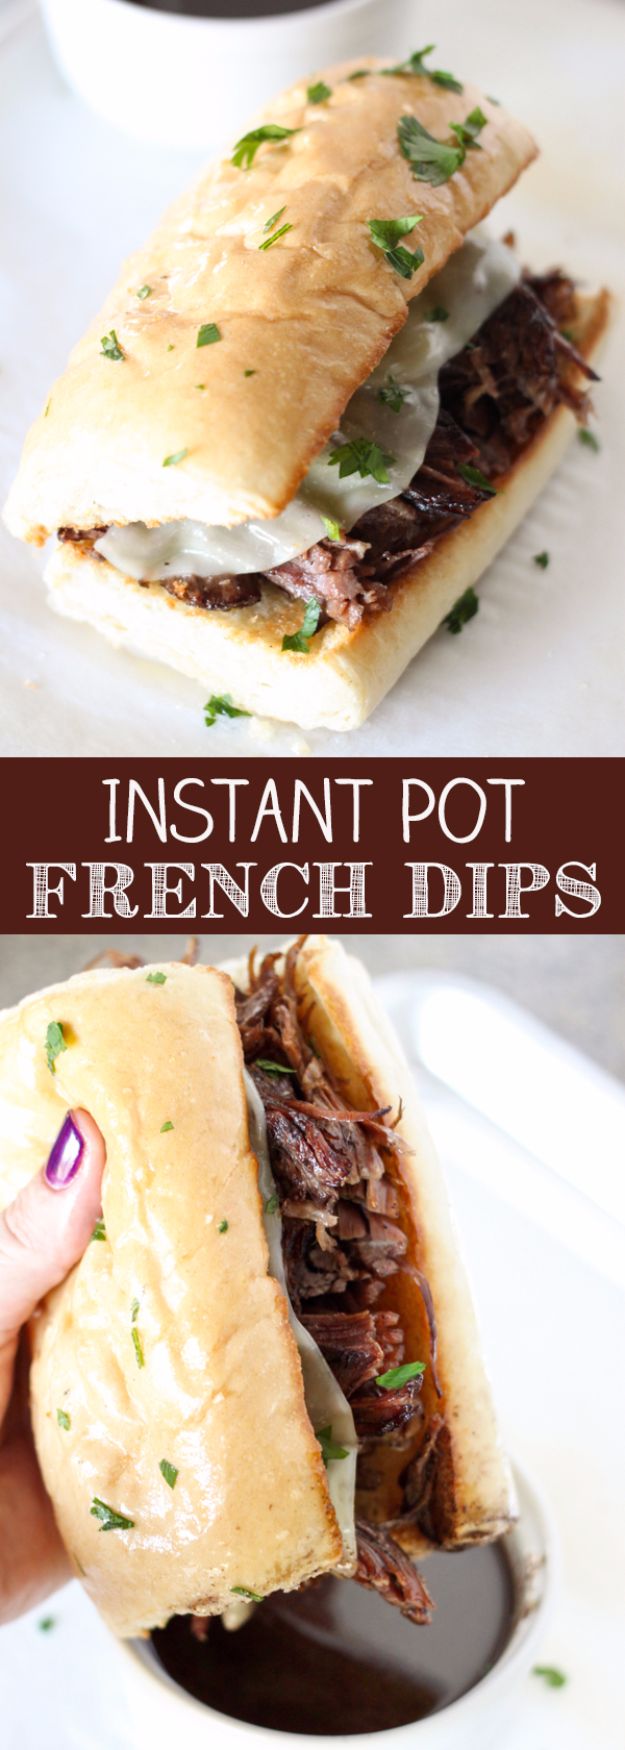 Instant Pot Recipes - Instant Pot Pressure Cooker French Dip Sandwiches - Easy Healthy Family Recipe Ideas for Instant Pot - Chicken, Brisket, Beef, Paleo, Low Carb, Vegetarian, Pork, Keto and Vegan - Pressure Cooking and Pressure Cooker Foods - Breakfast, Lunch and Dinner Ideas work With Weight Watchers and Whole 30 Diets http://diyjoy.com/instant-pot-recipes